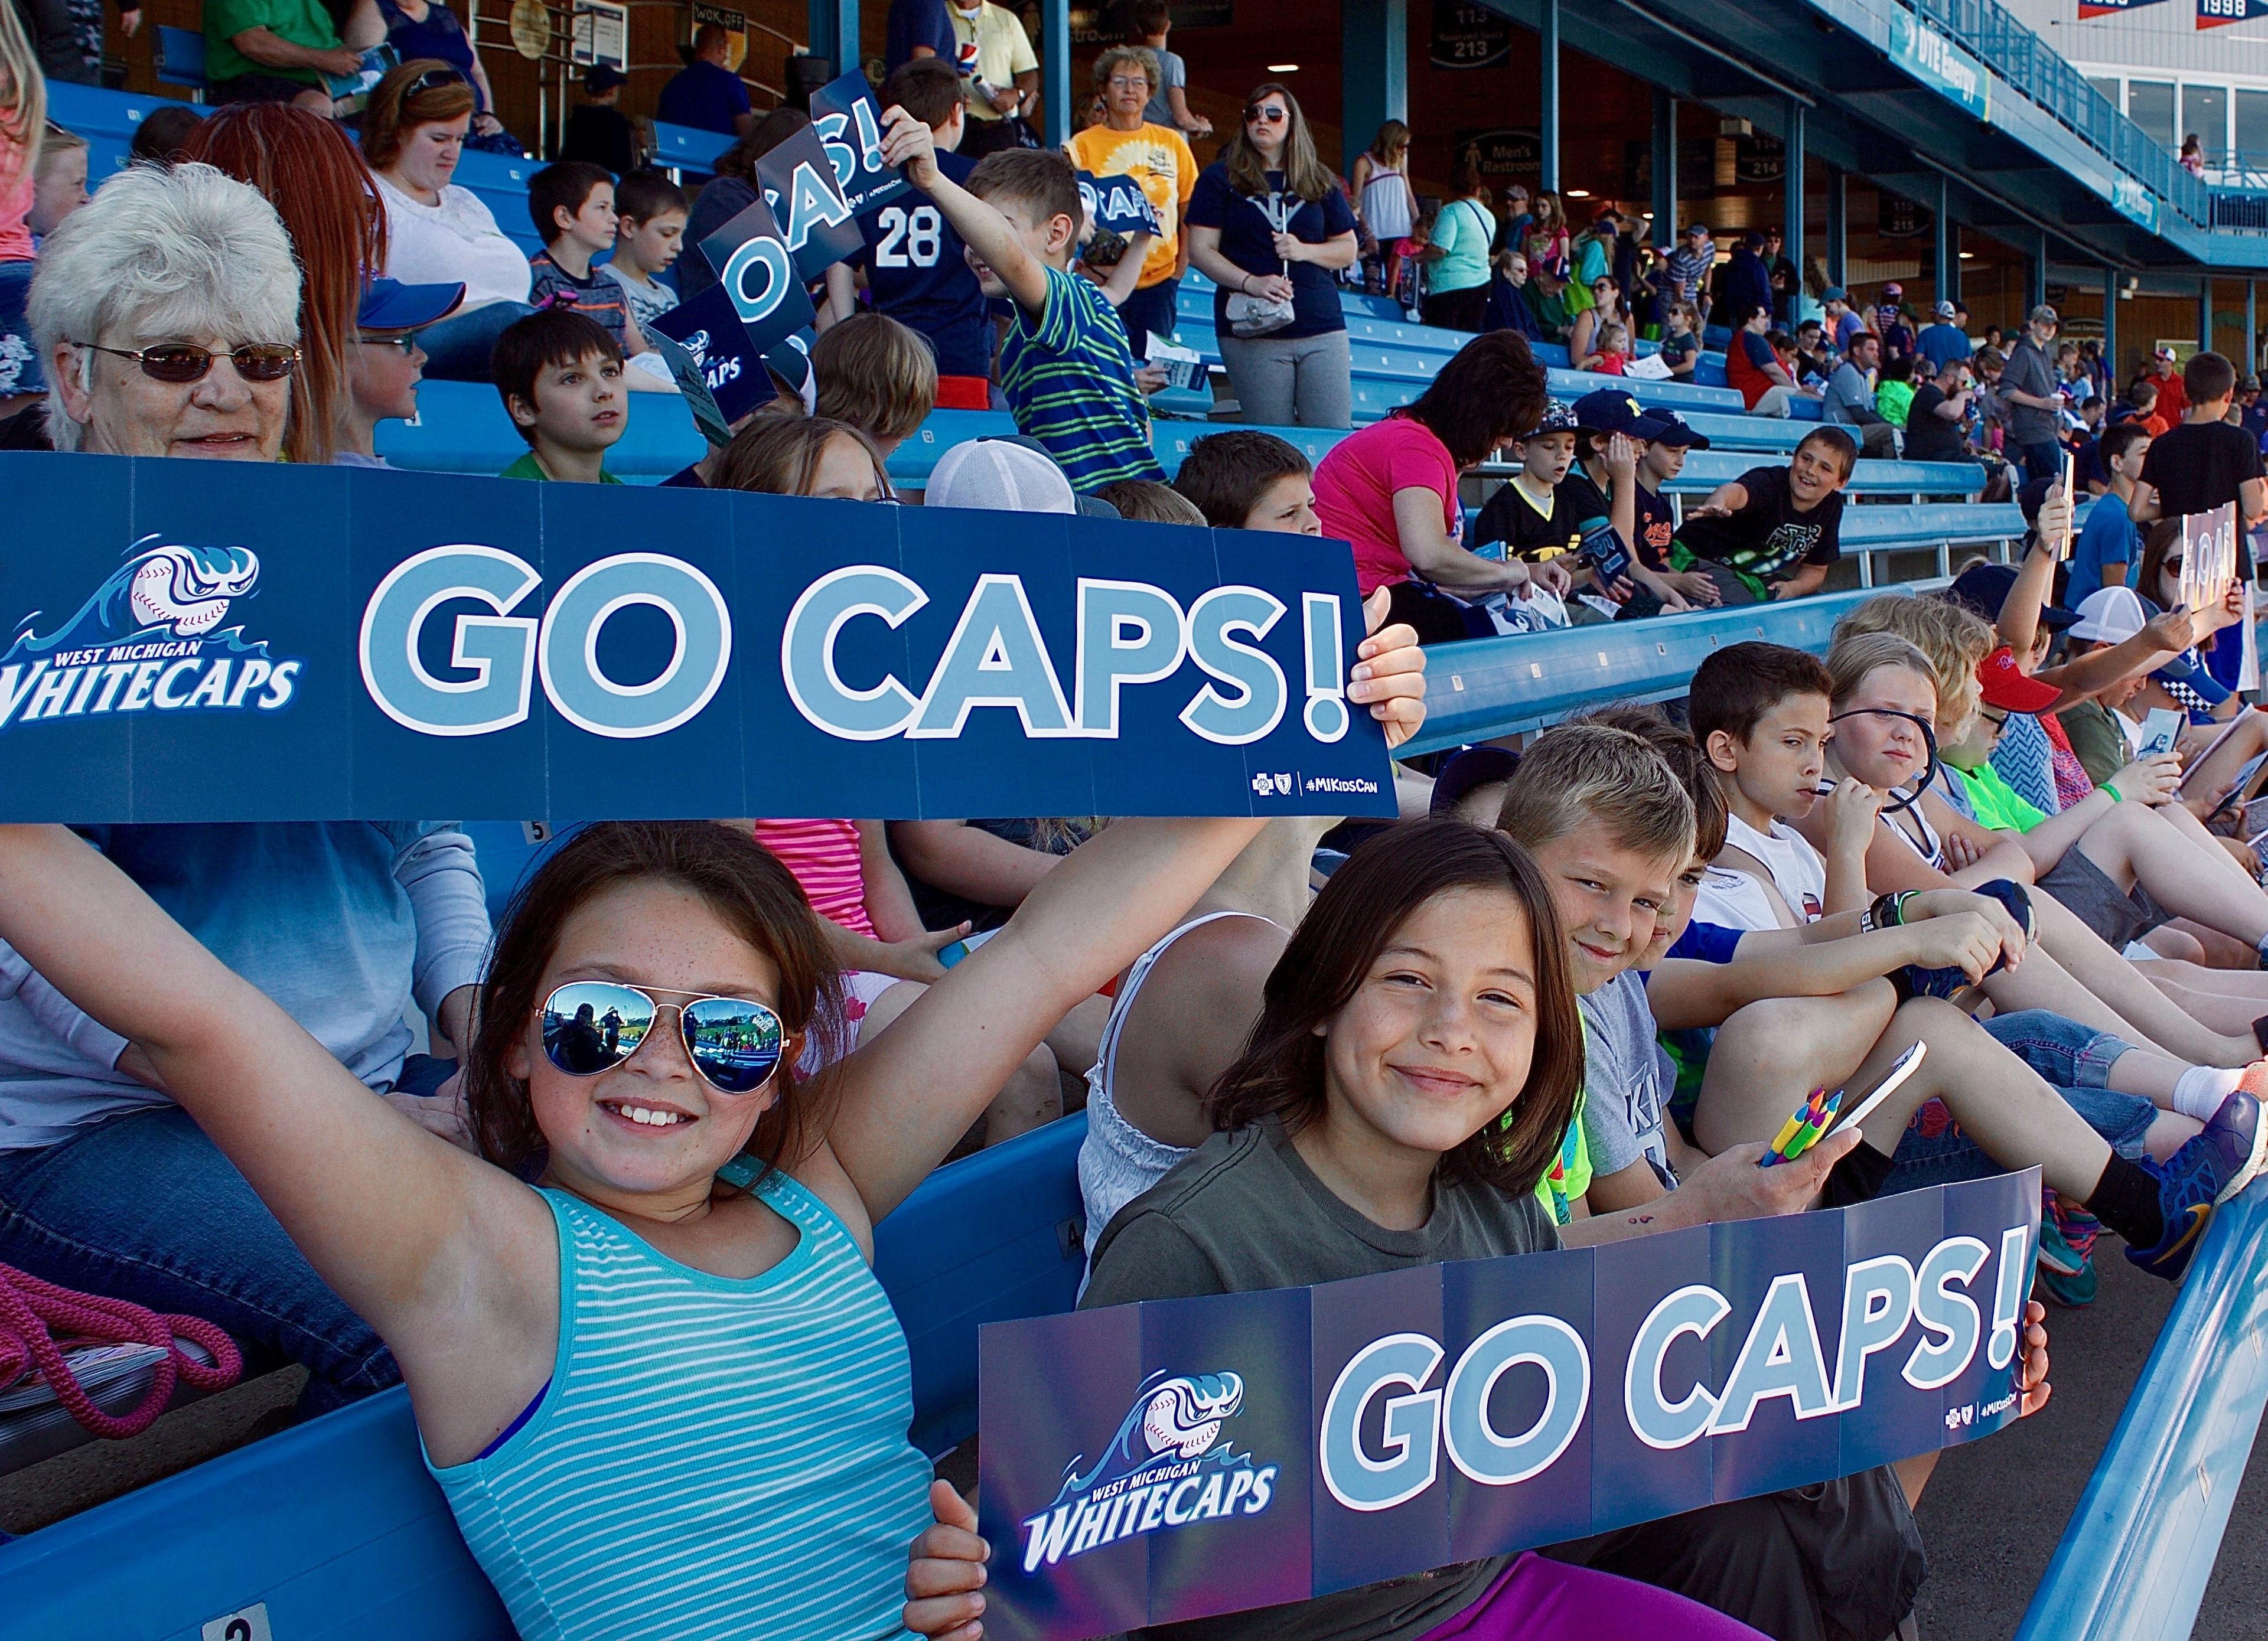 Students hold "Go Caps!" signs at one of last year's Whitecaps School Days games.